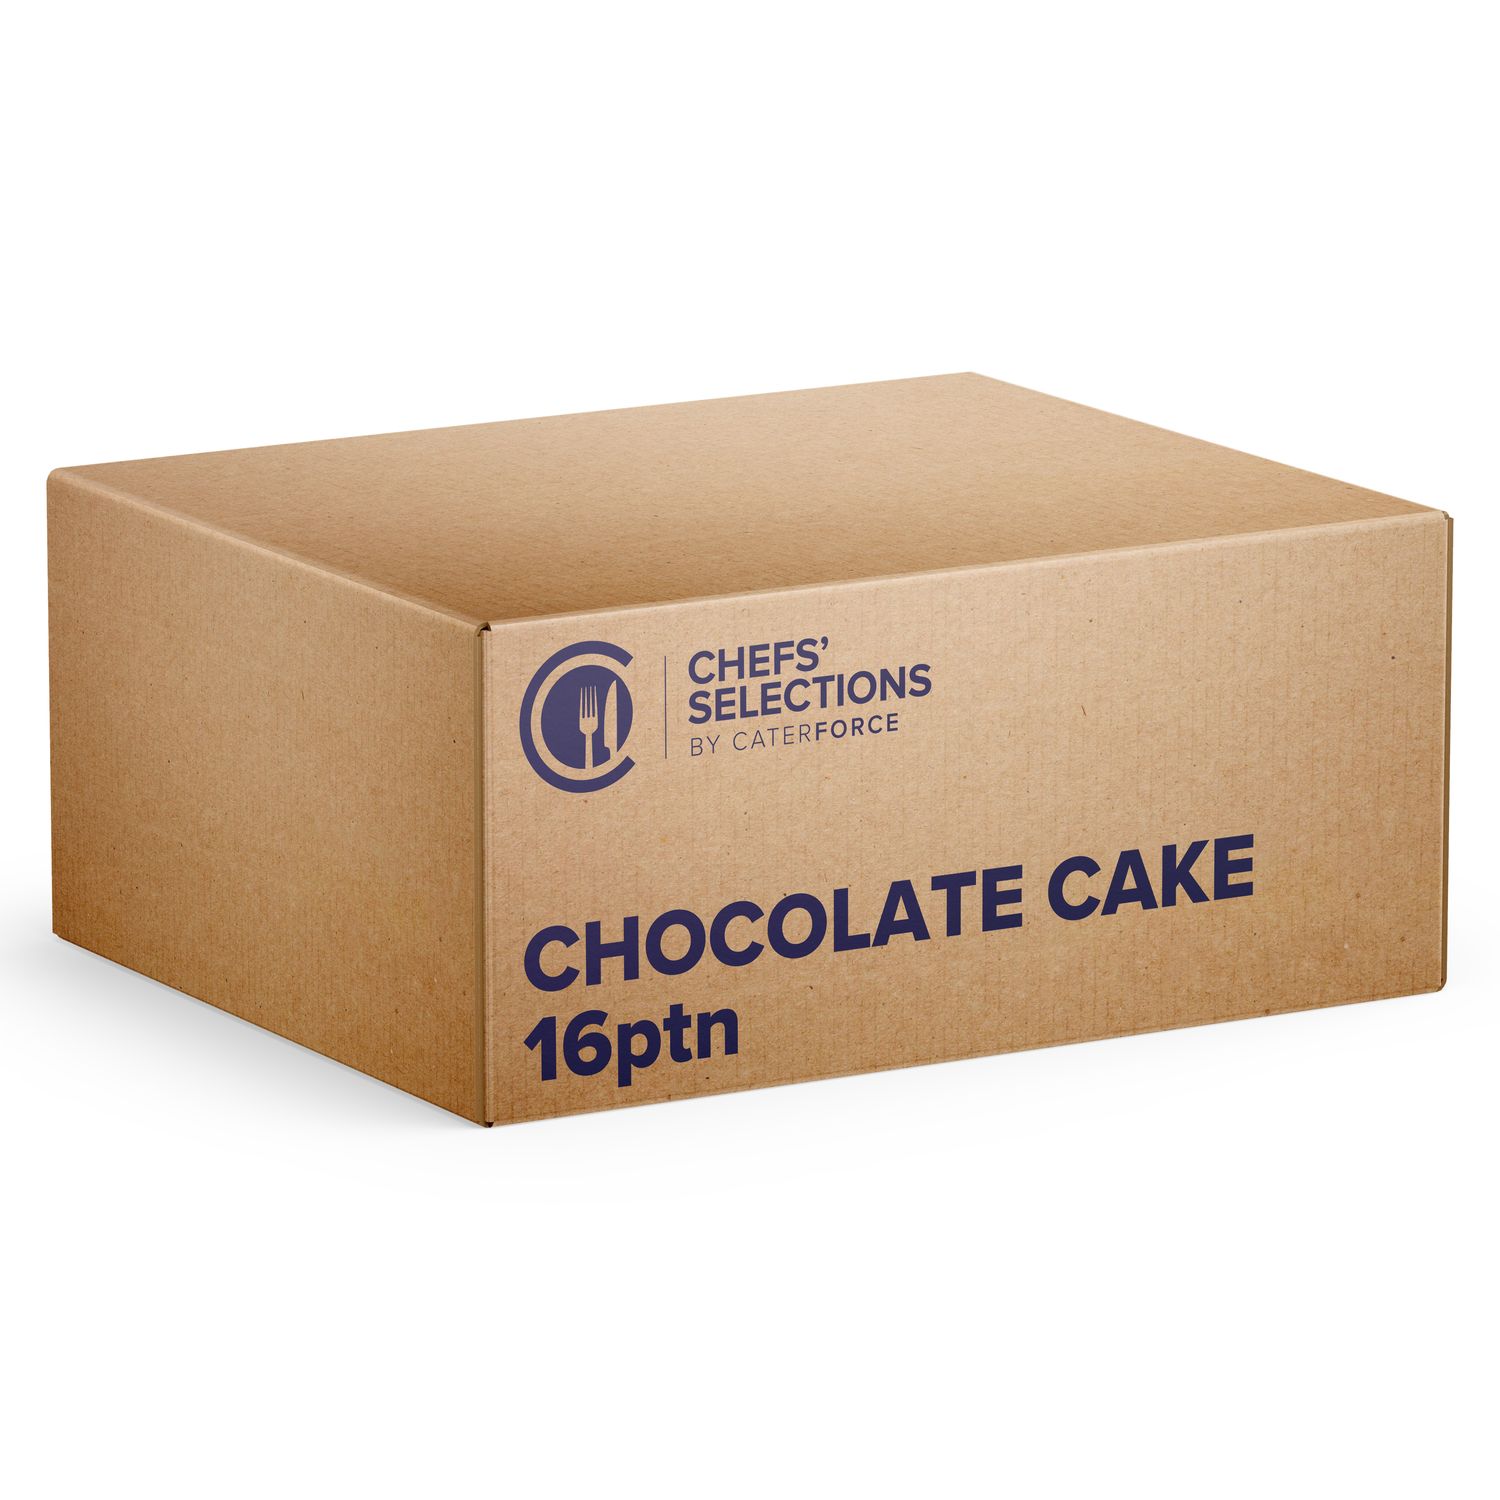 Chefs’ Selections Chocolate Cake (1 x 16p/ptn)